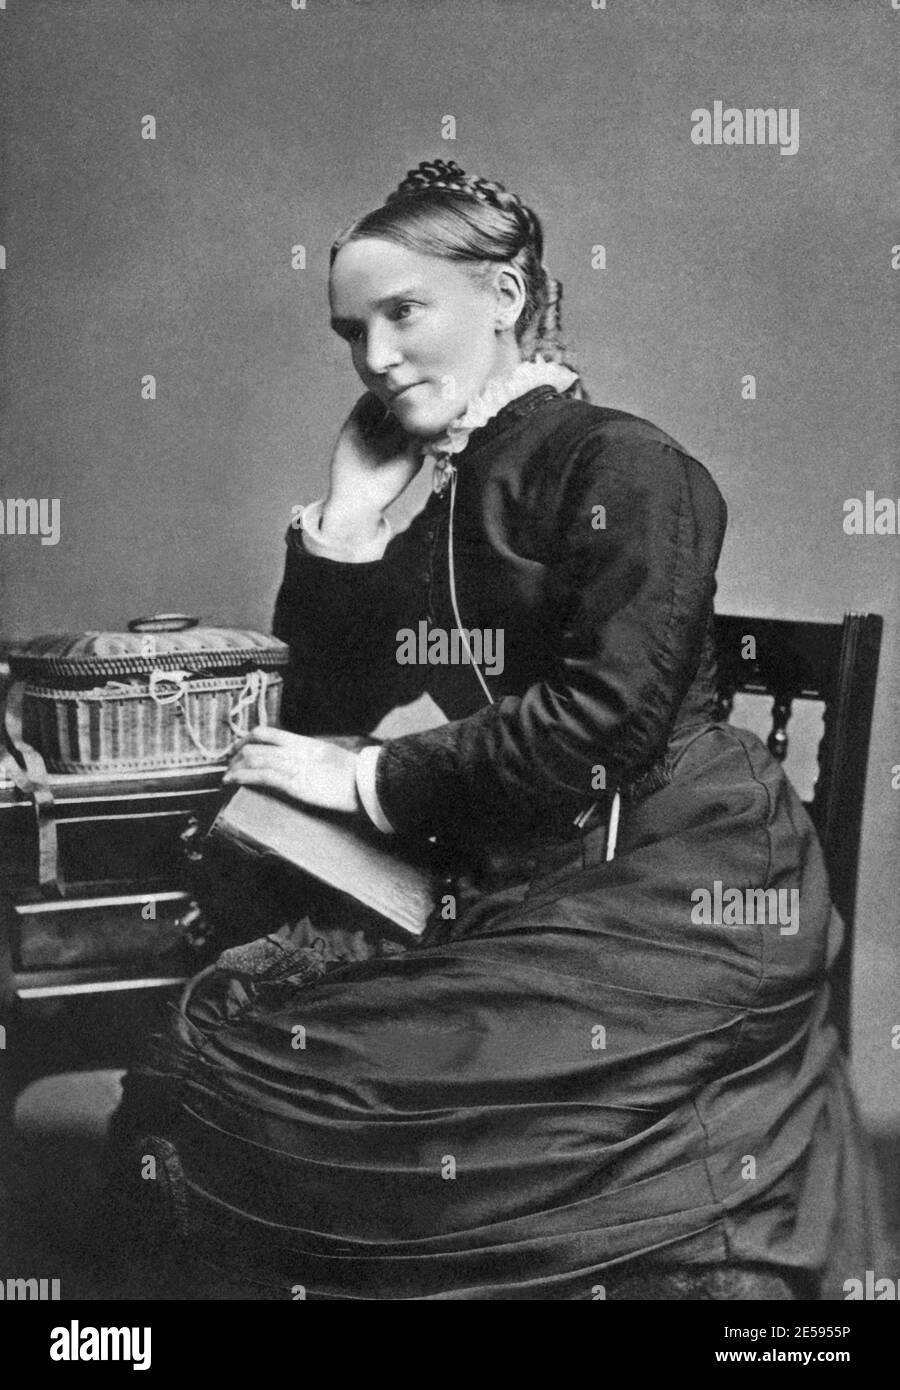 Frances Ridley Havergal (1836-1879), English Christian hymnwriter and poet, in a portrait by Elliott & Fry on February 1, 1879. Stock Photo